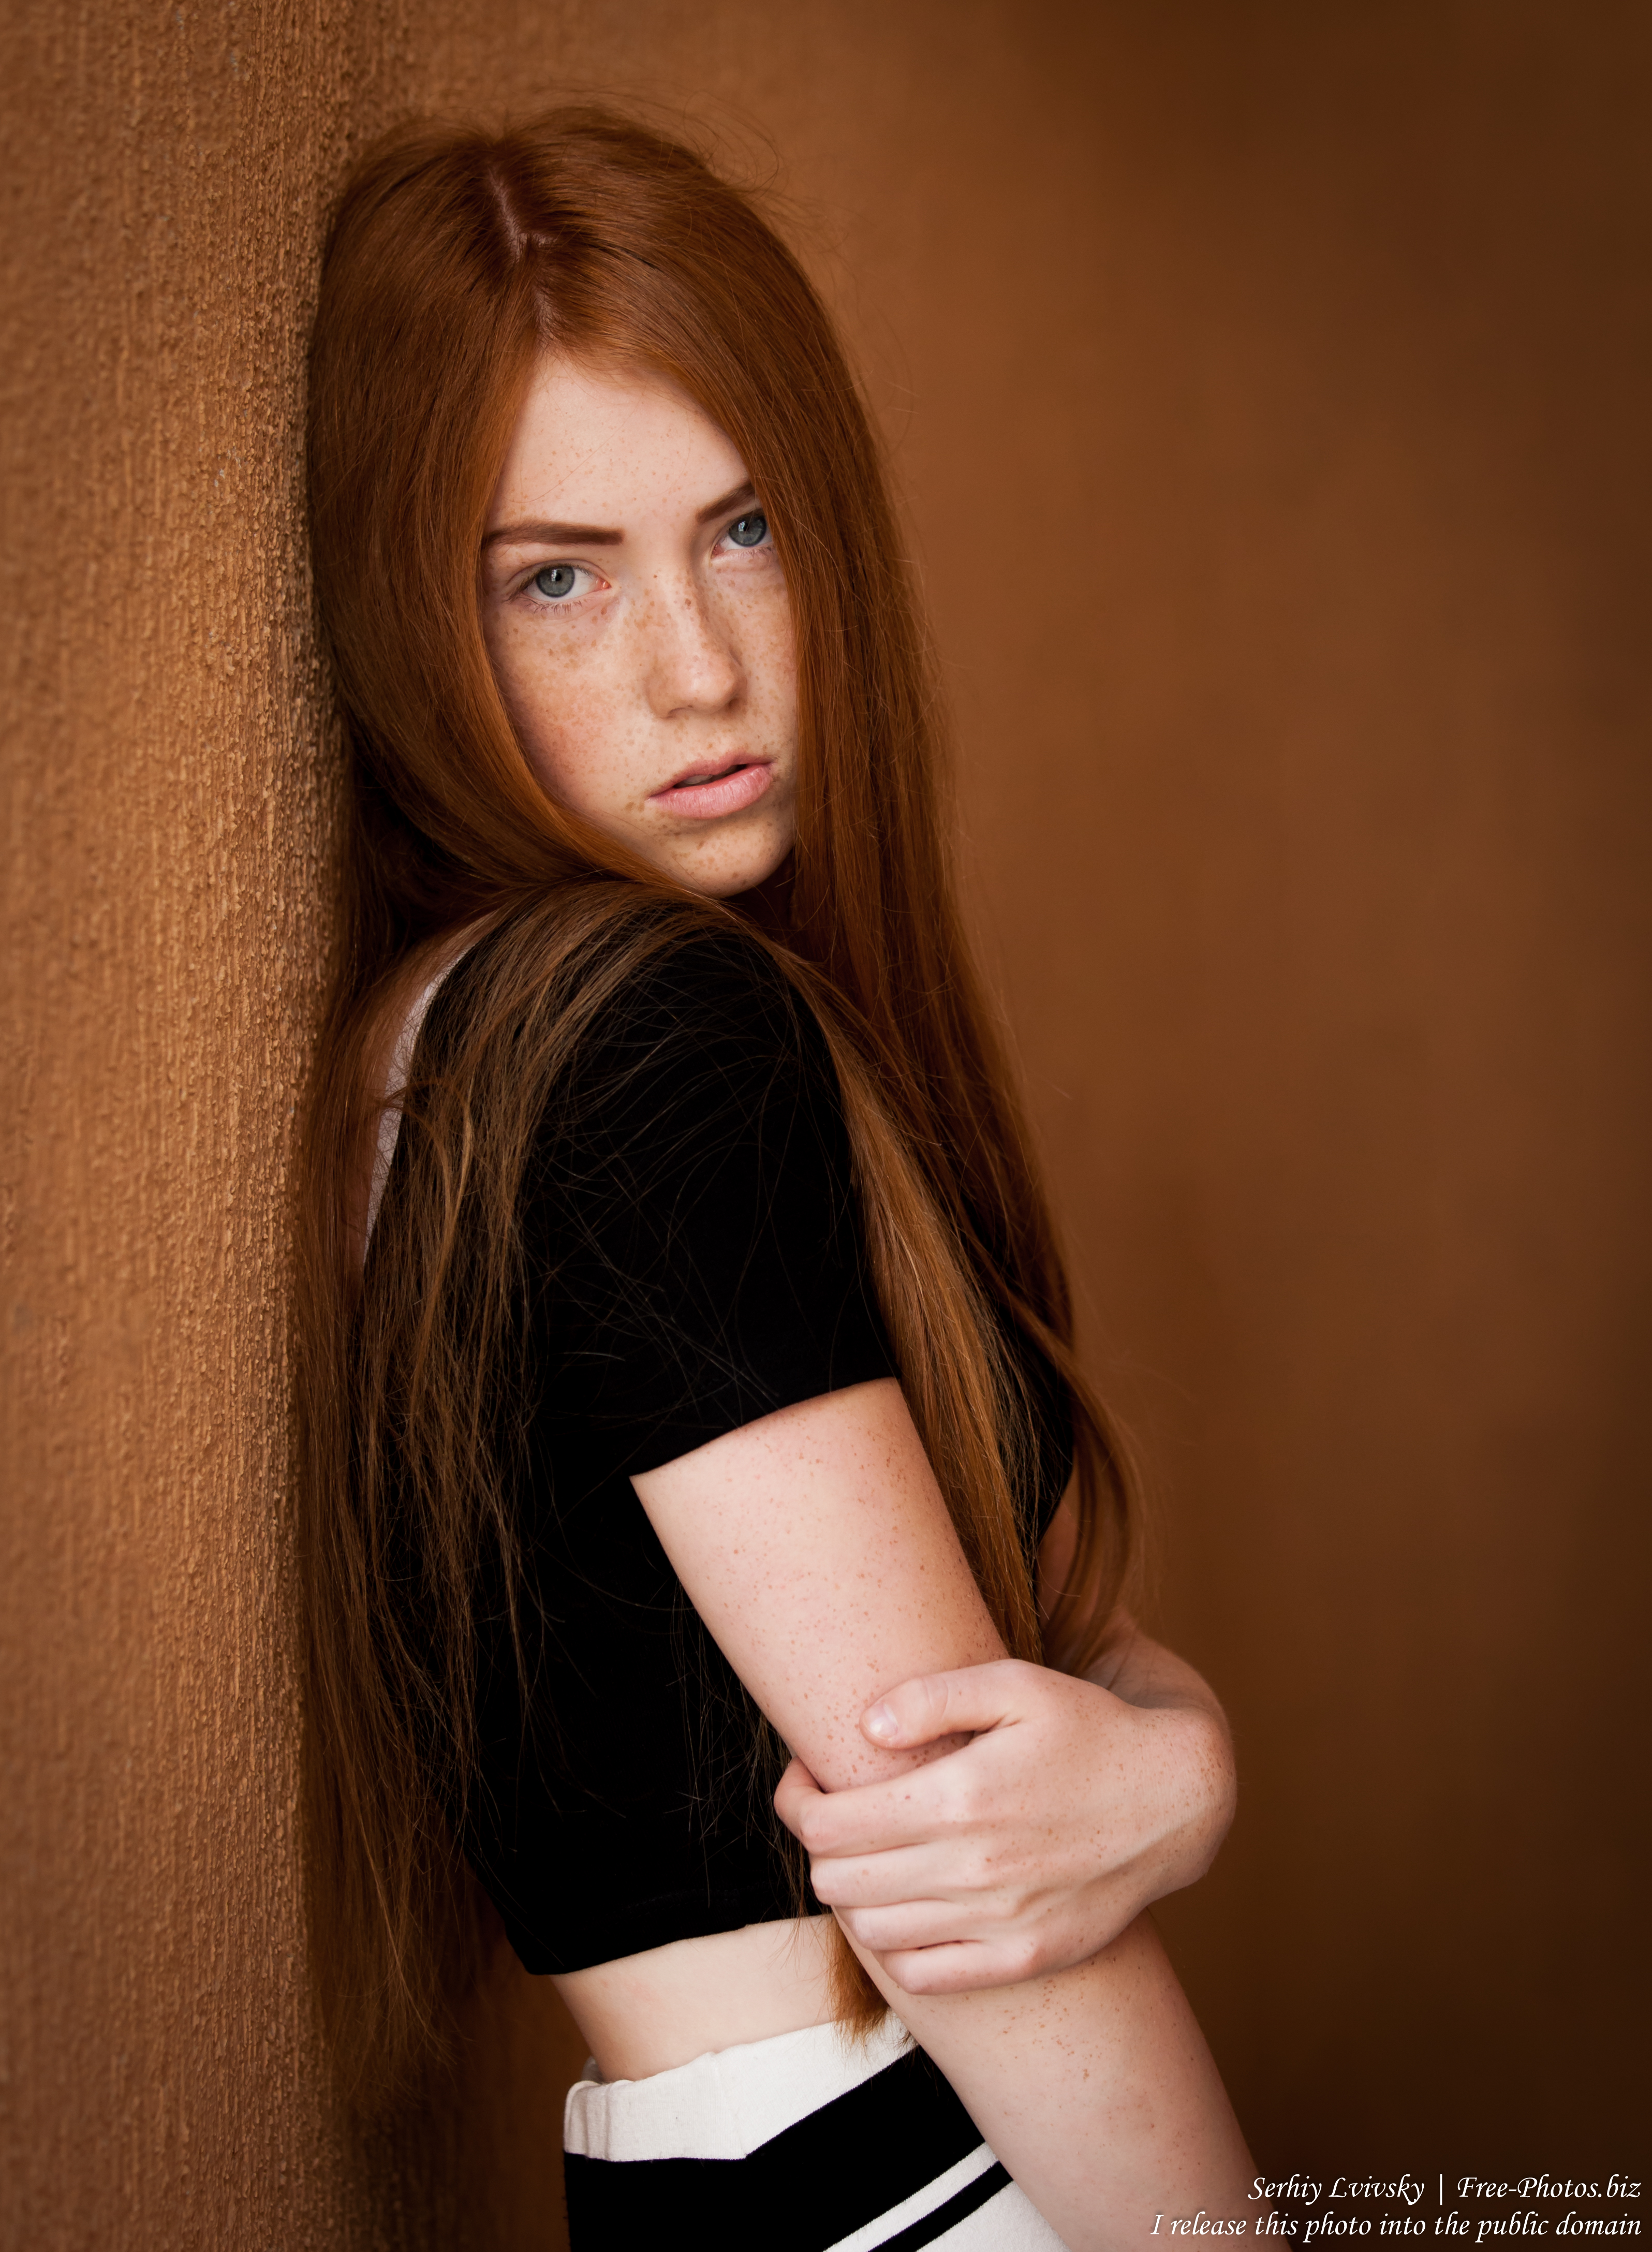 a 15-year-old red-haired Catholic girl photographed by Serhiy Lvivsky in August 2015, picture 16